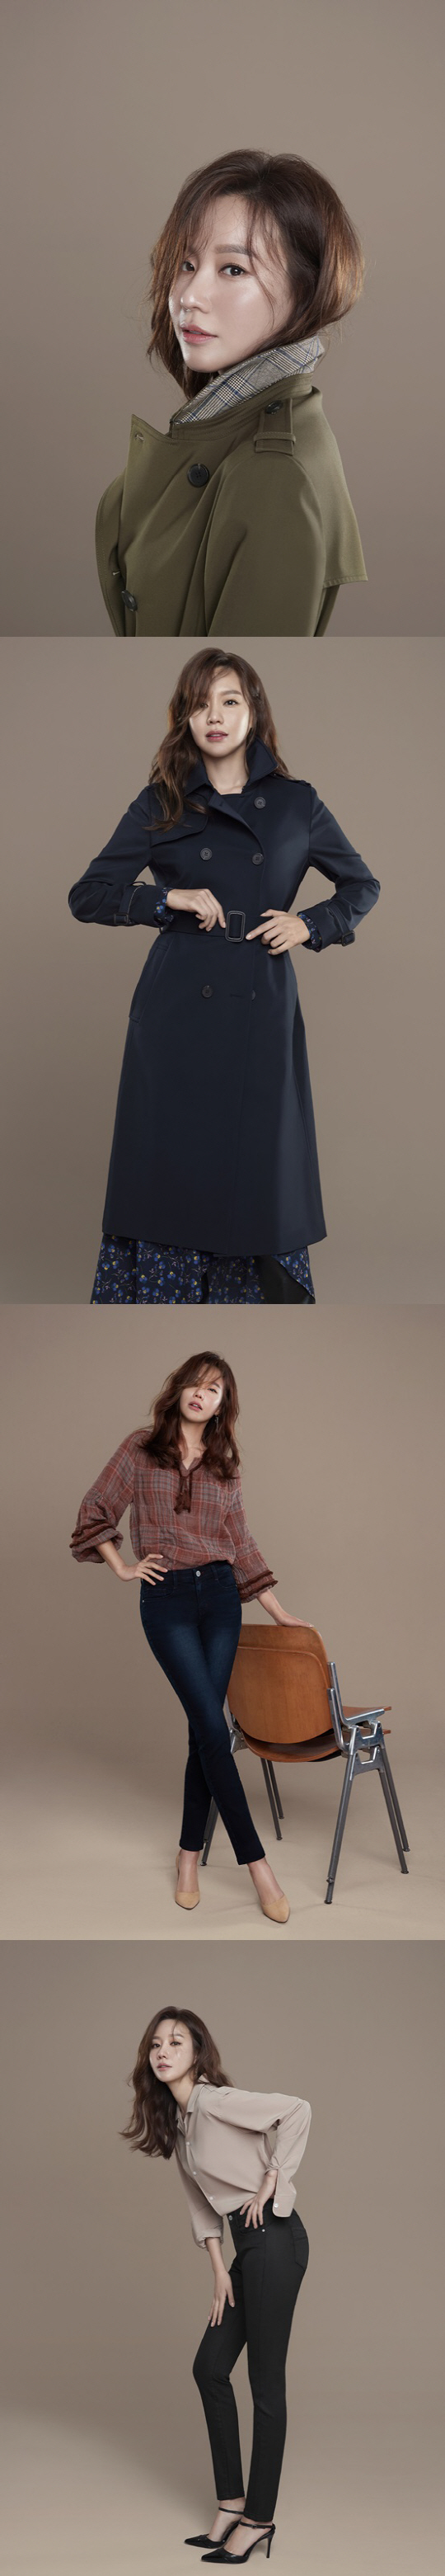 Kim Ah-joong reported on the recent situation as a picture of the fall.Actor Kim Ah-joong has emanated the charm of a lush fall goddess in the 2018 FW pictorial.Kim Ah-joong in the picture is a blouse of a bohemian mood, and at the same time, she is more adorable than a lovely figure.In addition, the trench coat is classic but moody, and it has made the 15th year of debut of the actress show off the inside of the autumn to wait for the coming autumn.Kim Ah-joong is set to appear in OCN Drama Bad Guys: The Movie (Gase).